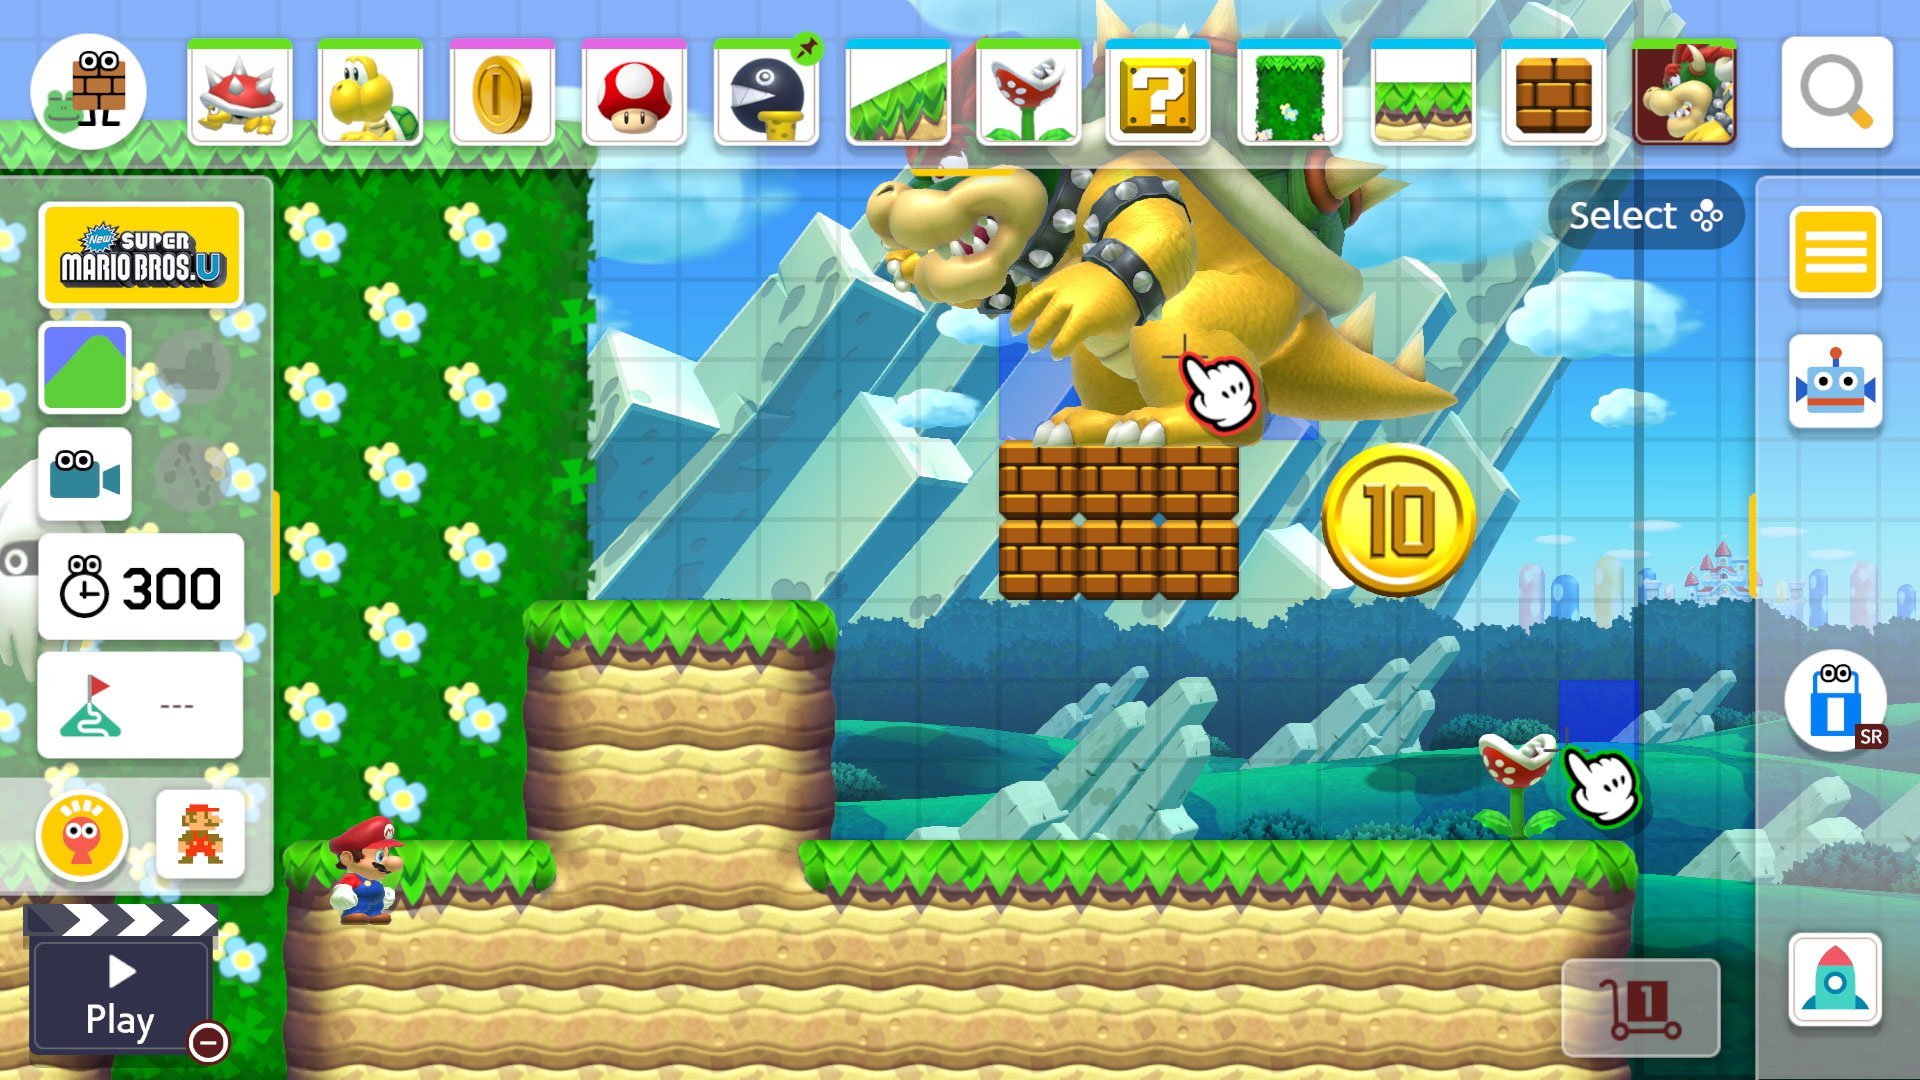 Mario Maker 2 adds story mode, online multiplayer | VGC